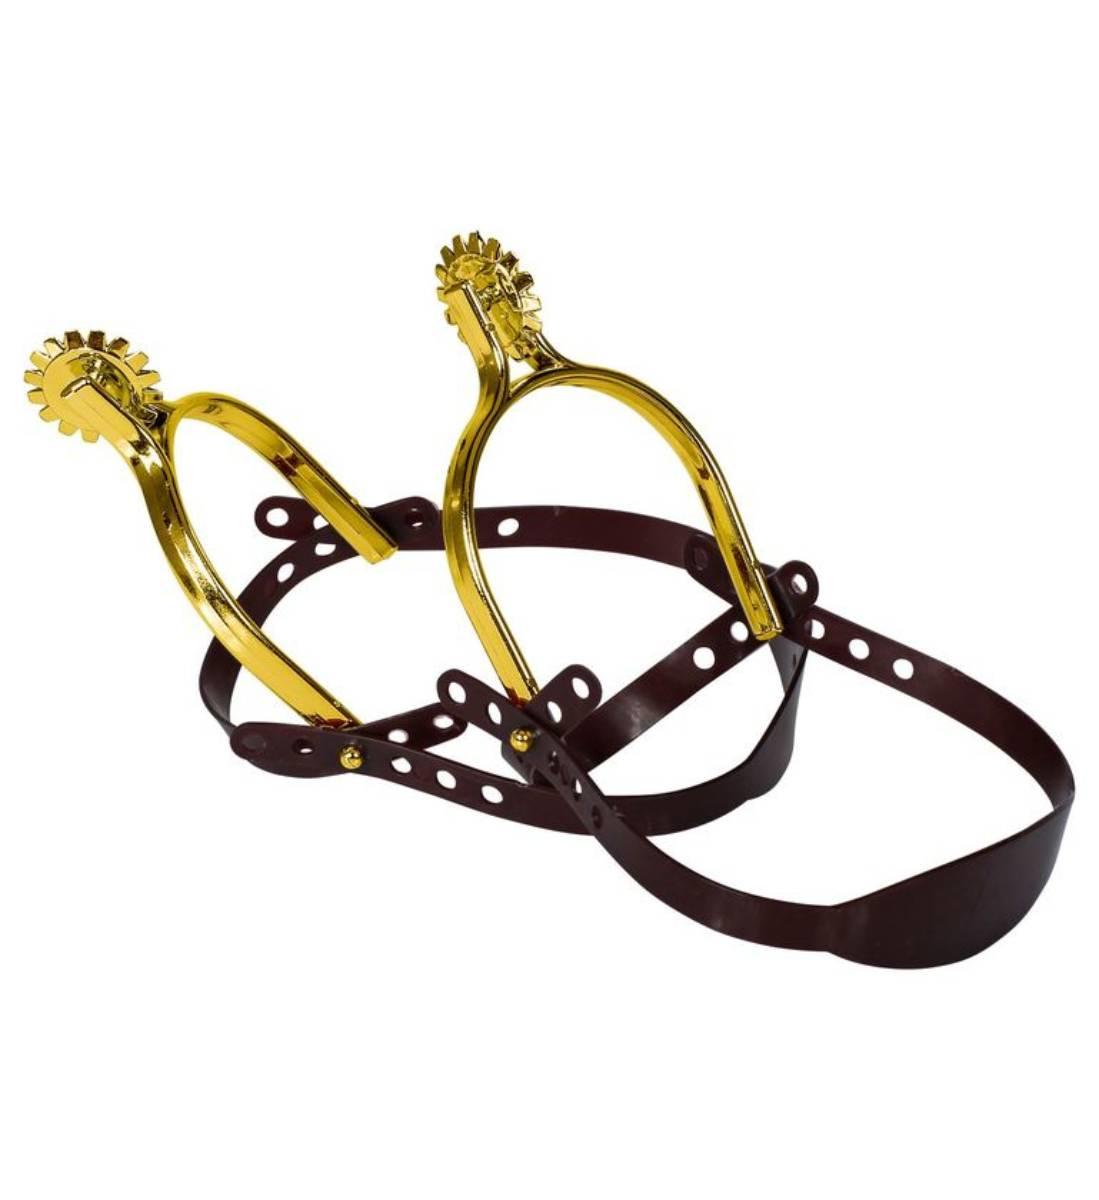 Golden spurs for Cowboys from a collection of Wild West fancy dress costume accessories here at Karnival Costumes online party shop